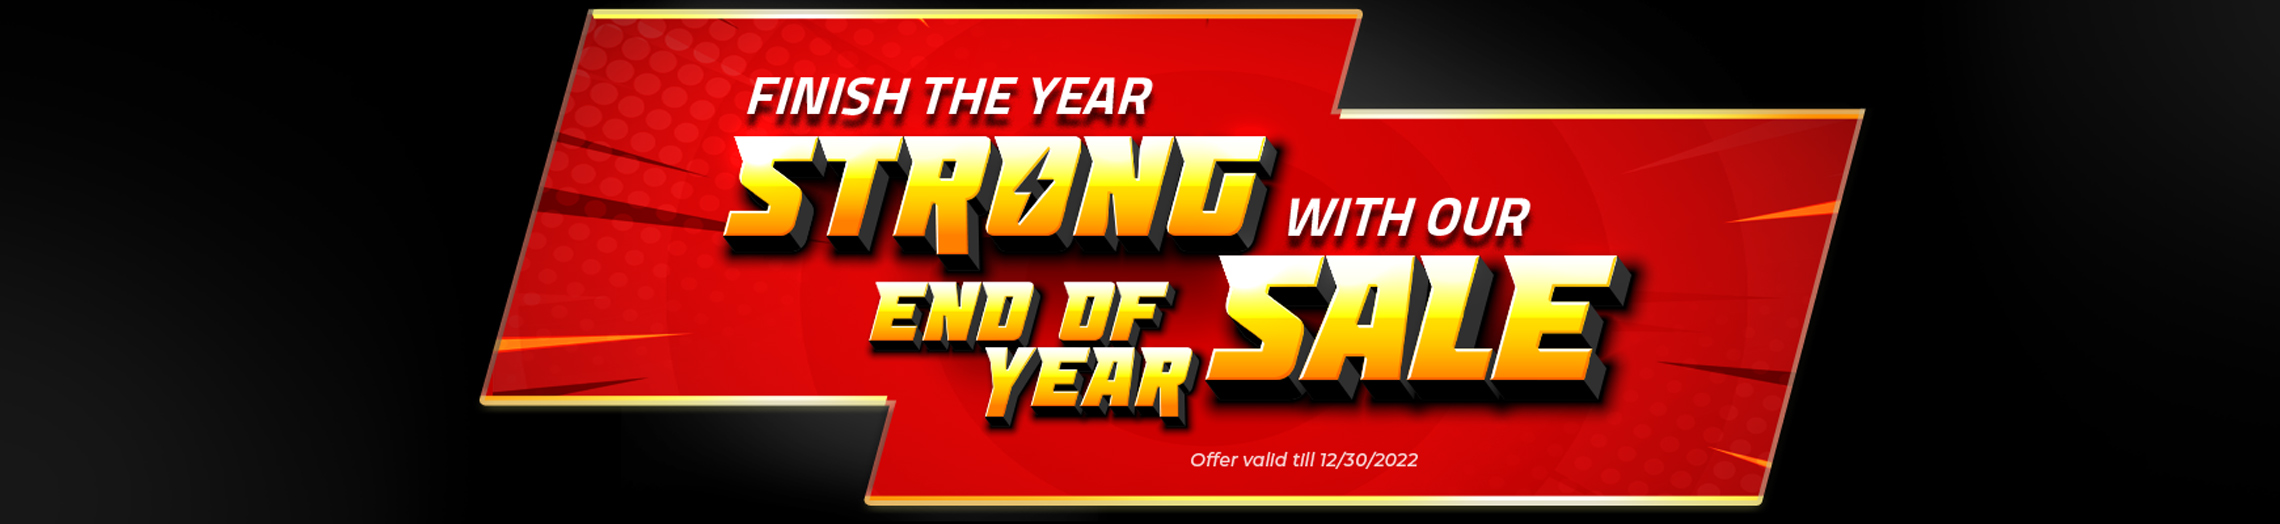 Finsh the Year Strong with our End of Year Sale!